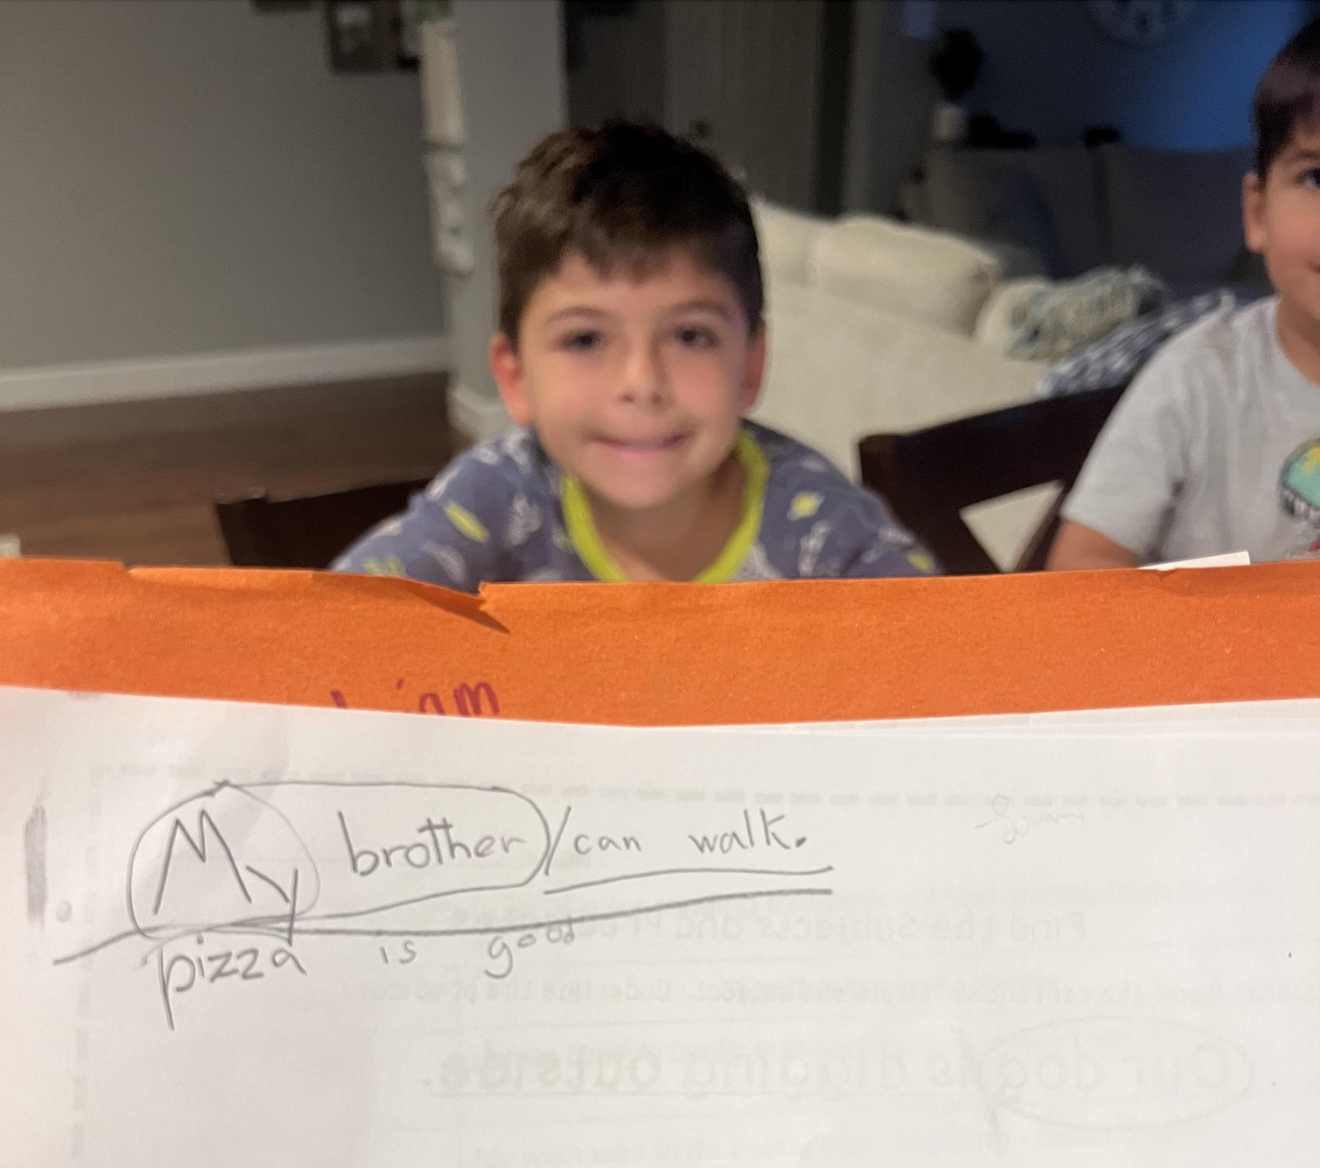 "My brother can walk" written on paper with older brother smiling in background